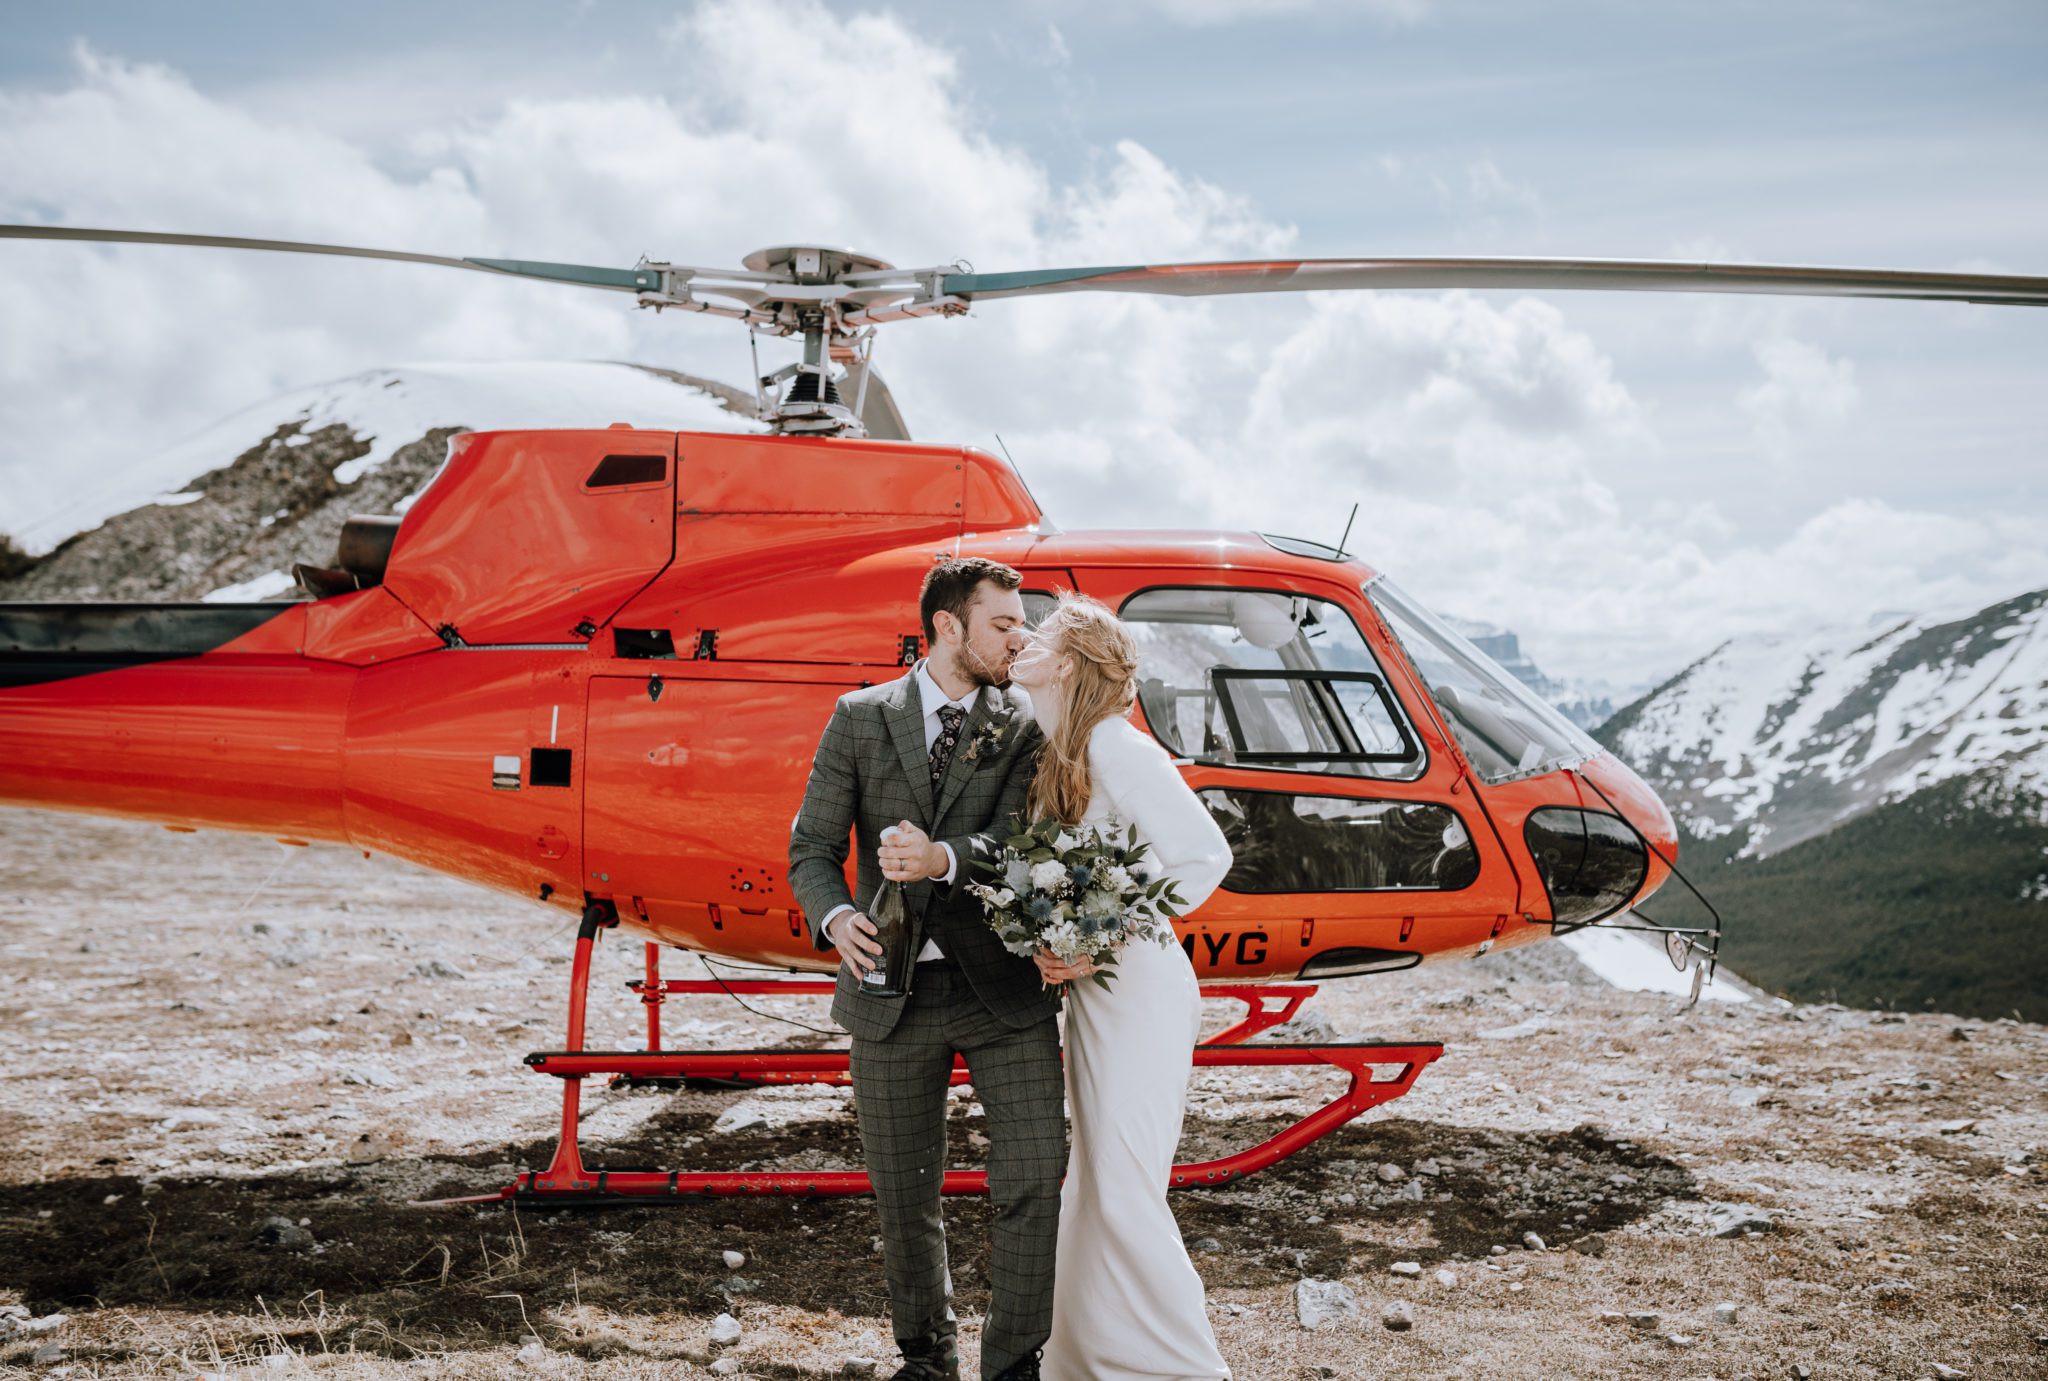 Adventure elopement with mountaintop champagne toast and helicopter tour